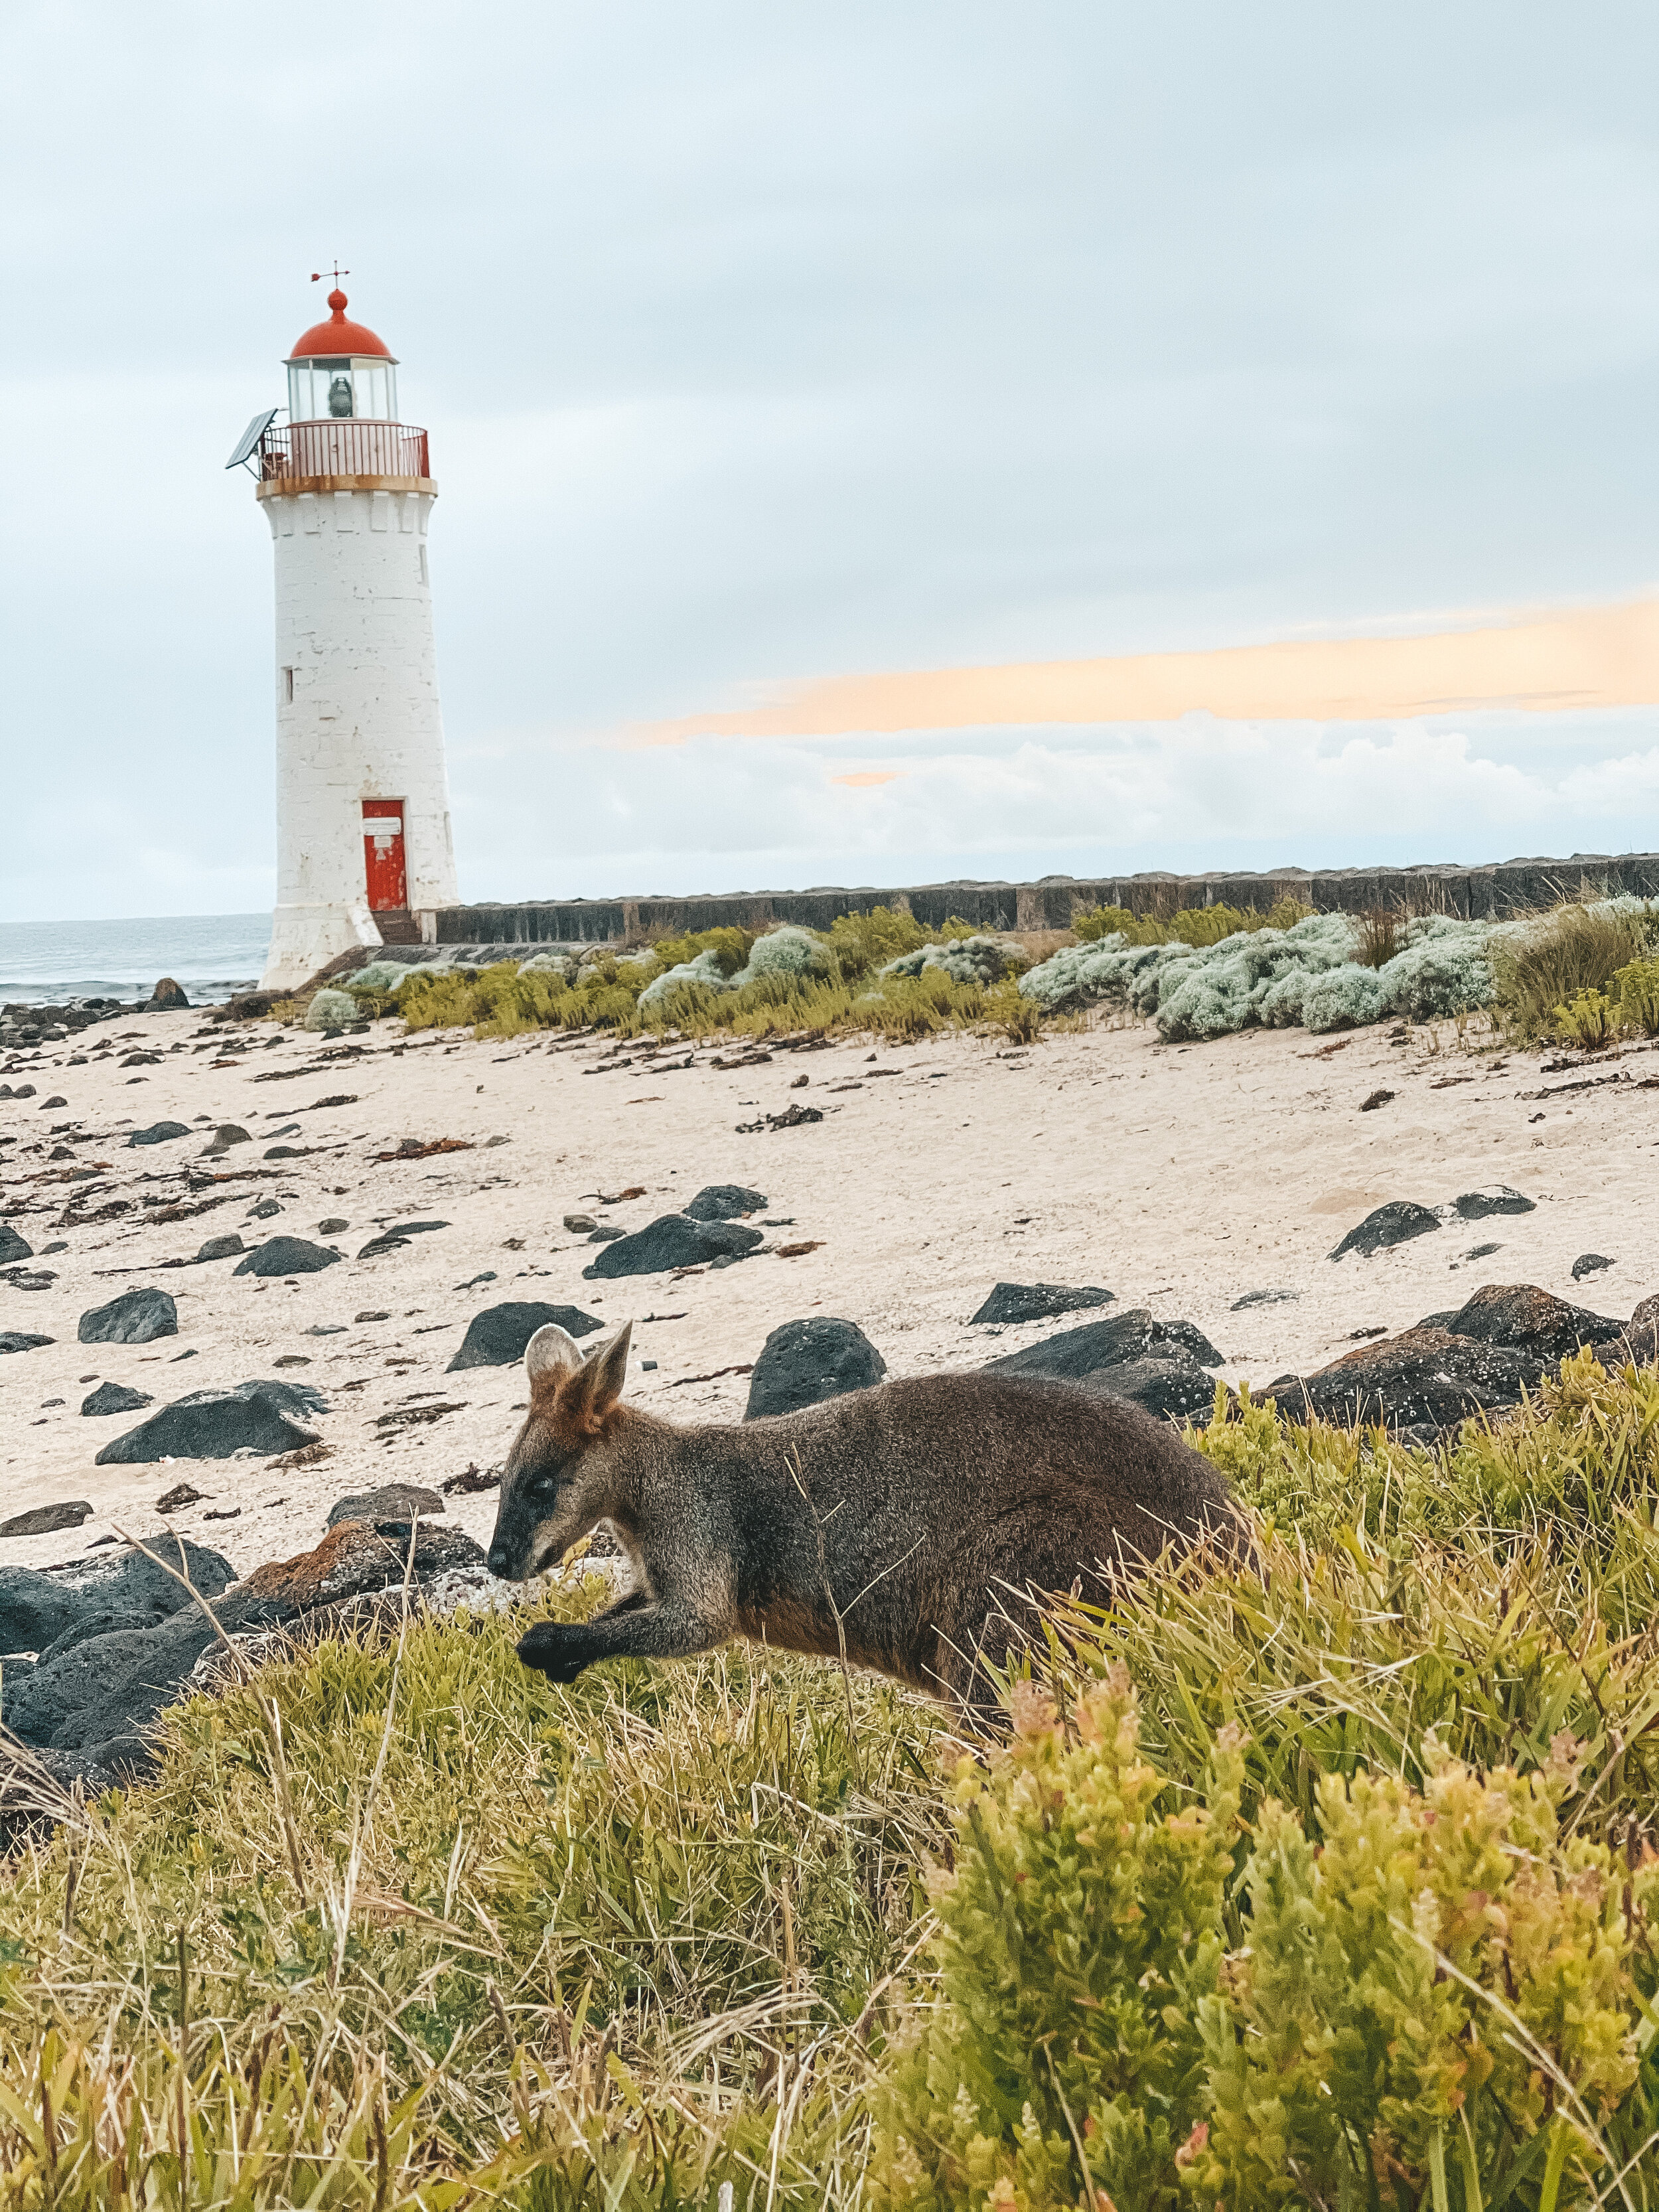 Cute wallaby eating in front of the lighthouse - Port Fairy - Victoria - Australia